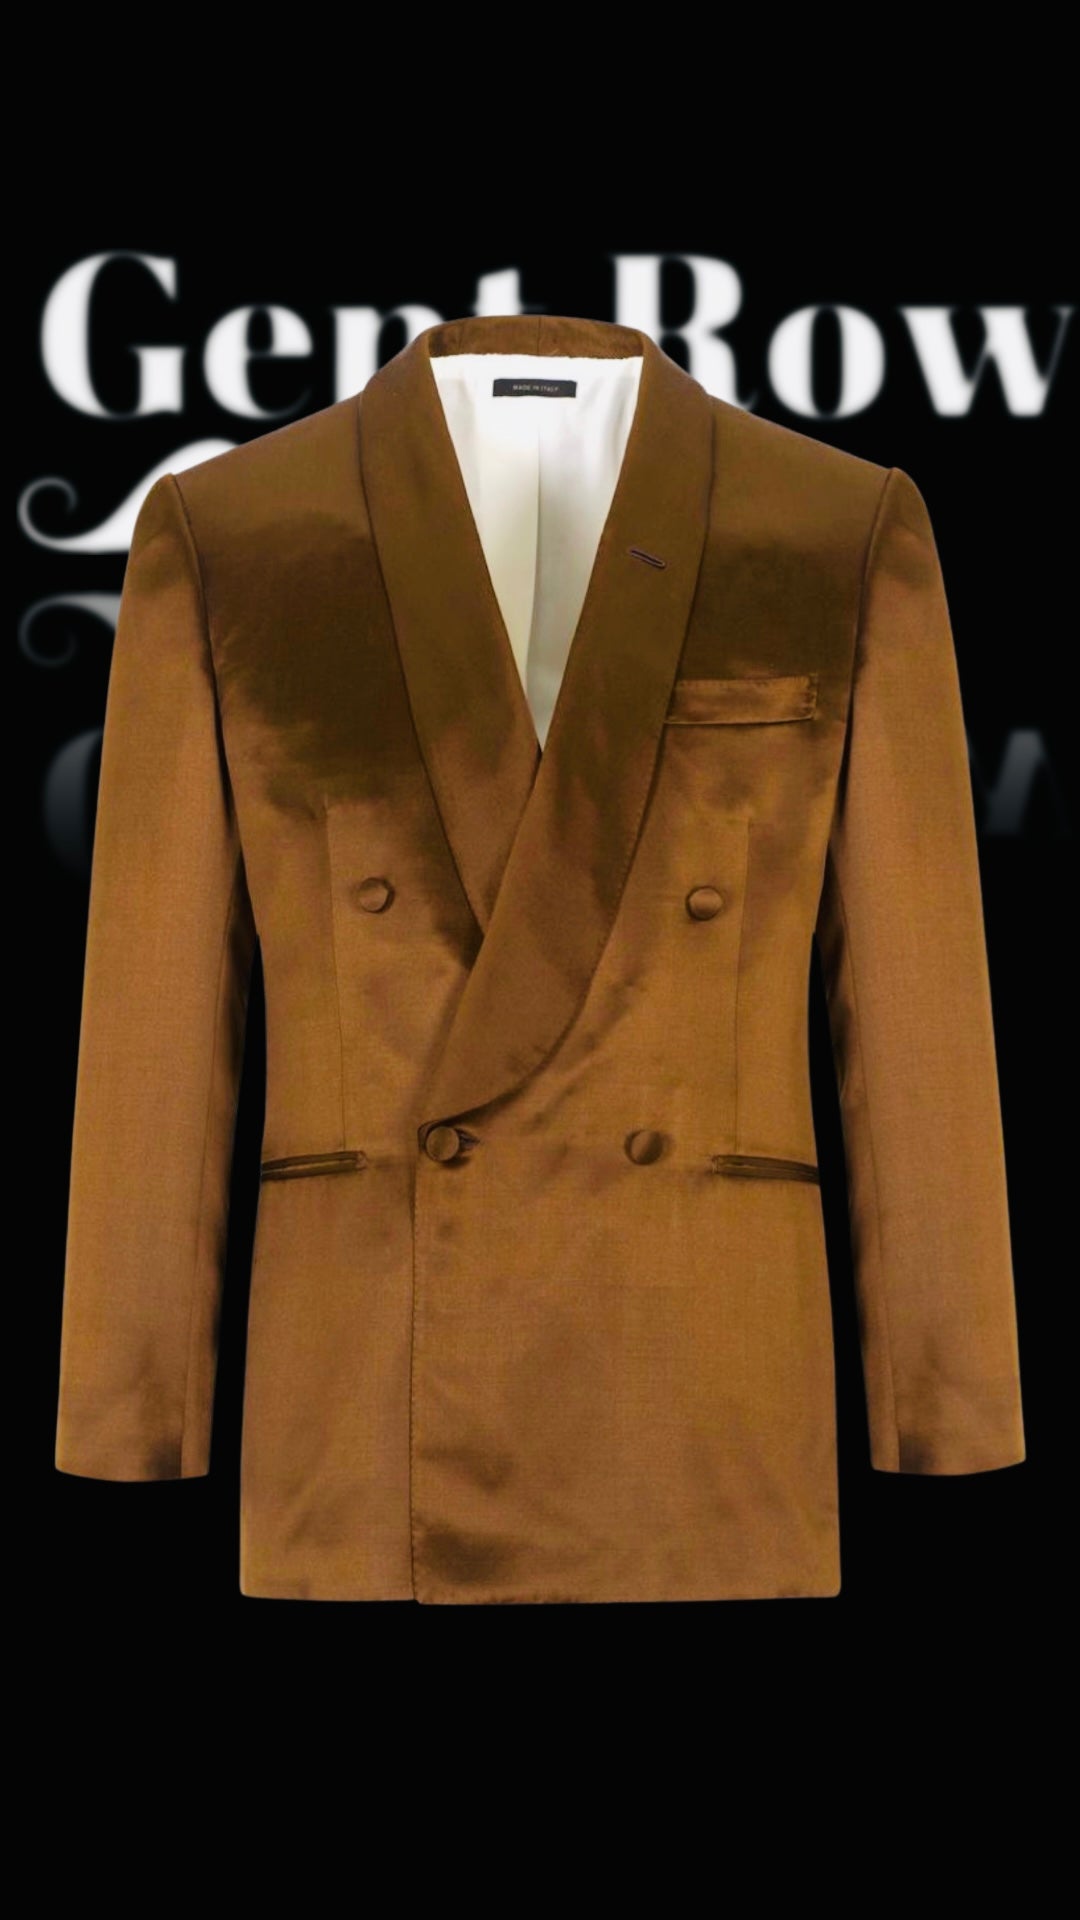 SIGNATURE Gent Row Chocolate Brown Velvet Double-Breasted Shawl Collar Dinner Jacket